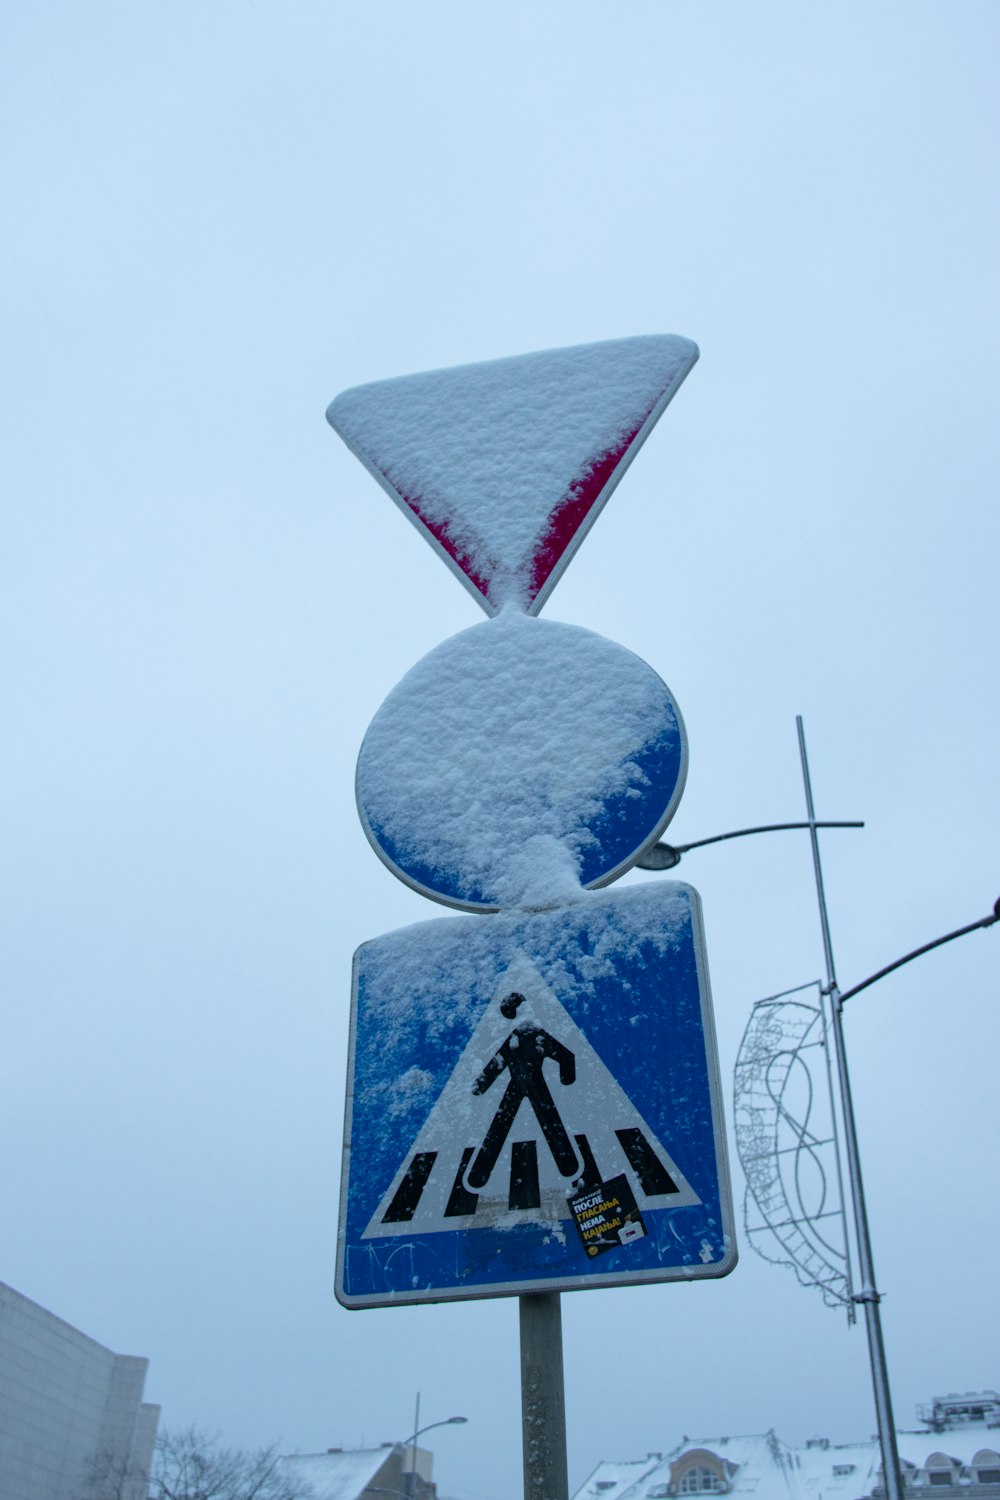 a street sign covered in snow on a pole